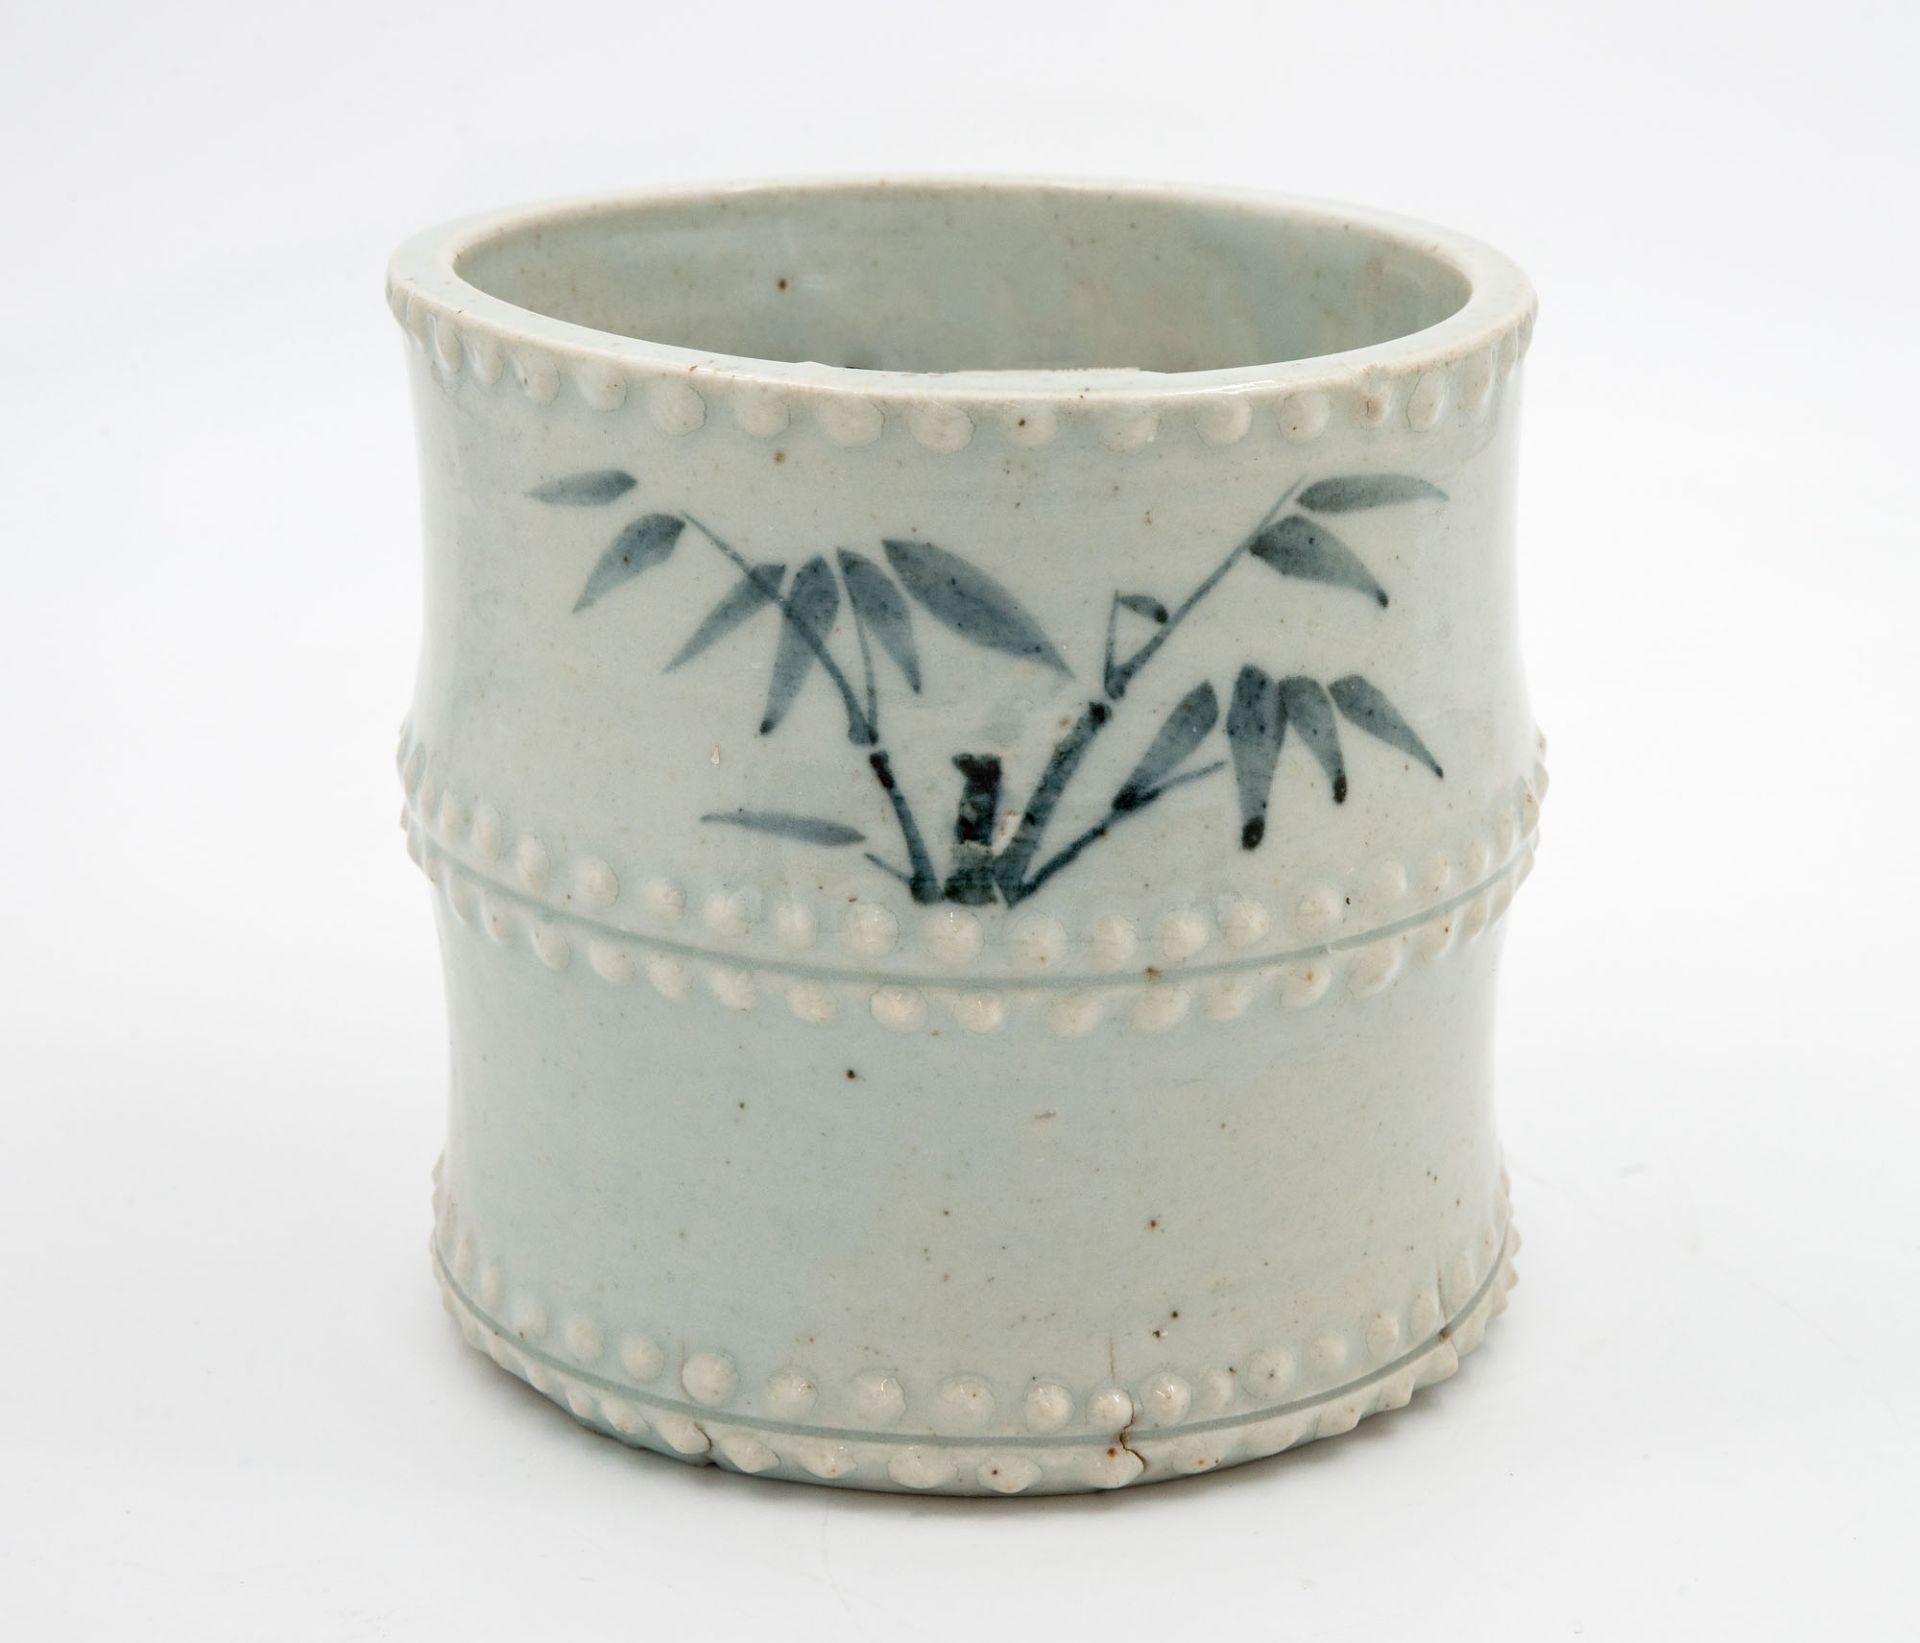 A Large Blue and White Porcelain Brush Pot, Korea, Late Joseon Dynasty, Early 20th Century